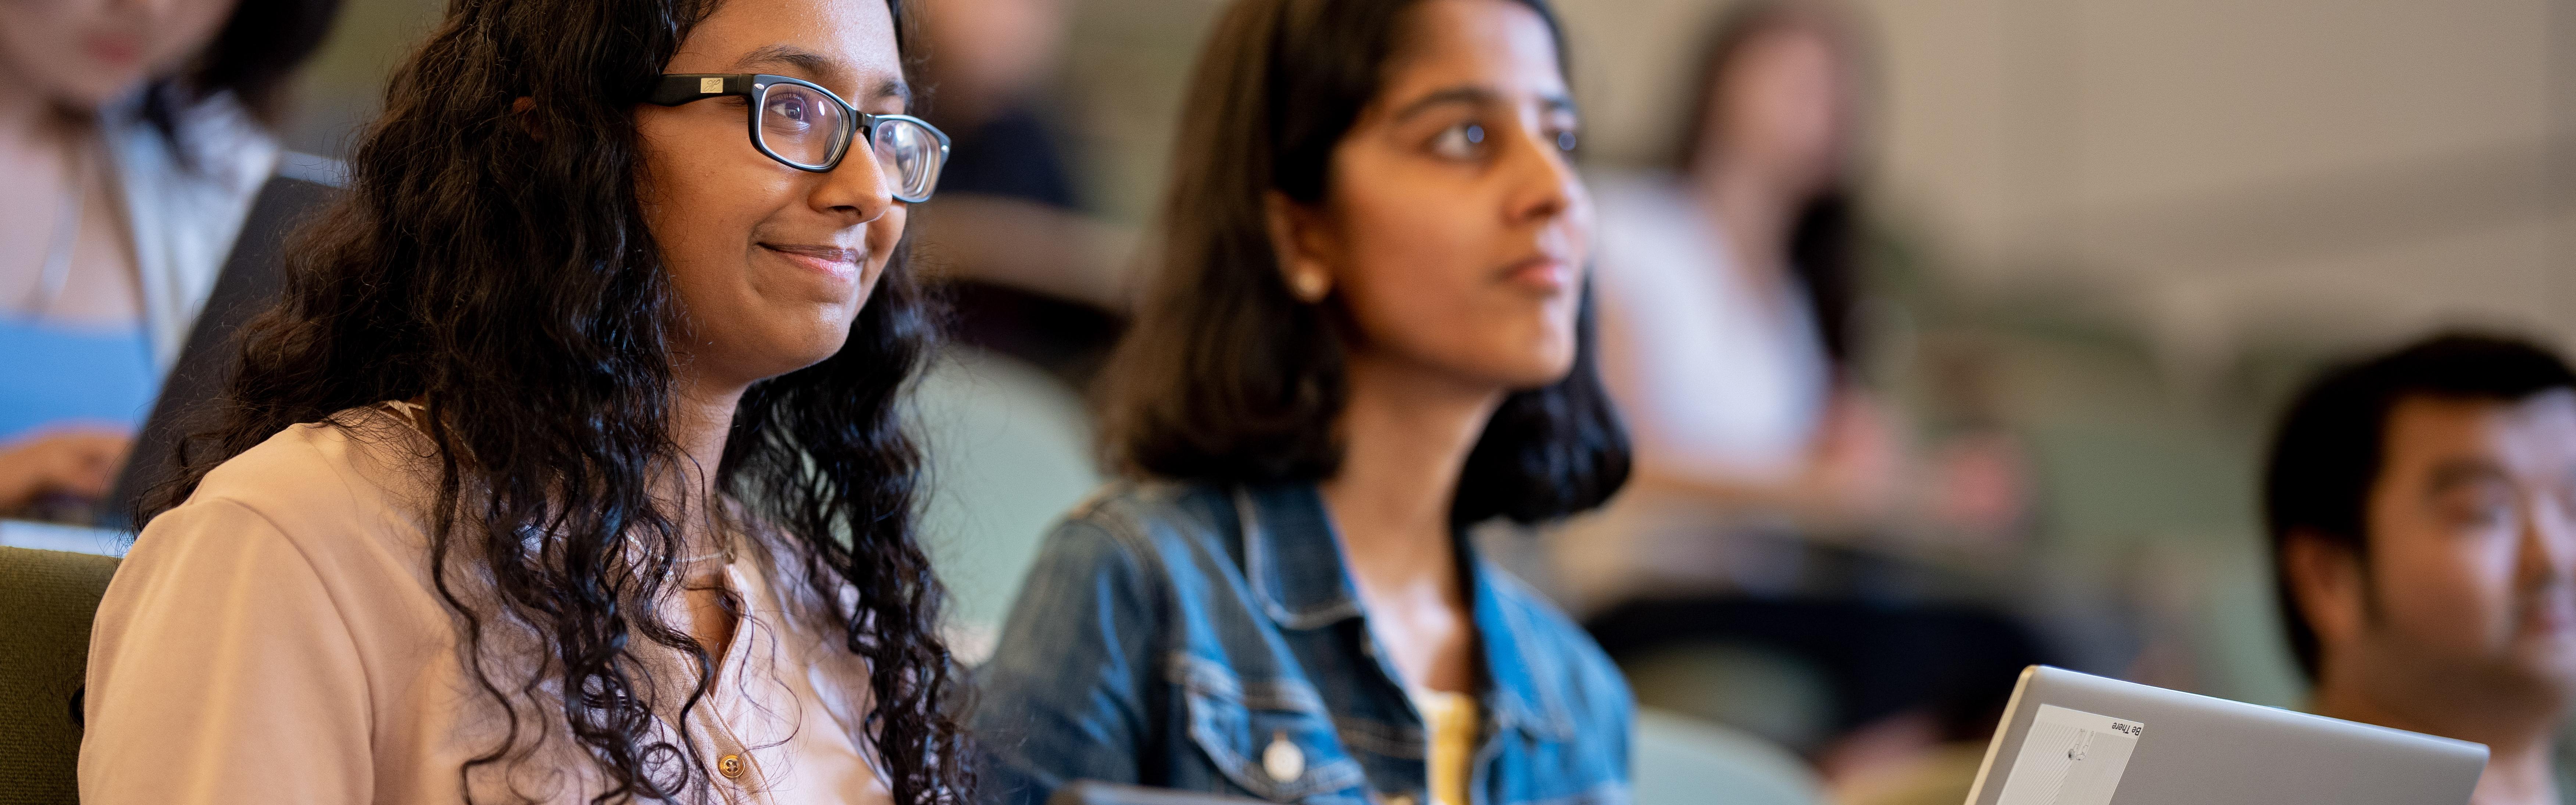 A close shot of two students listening in a lecture